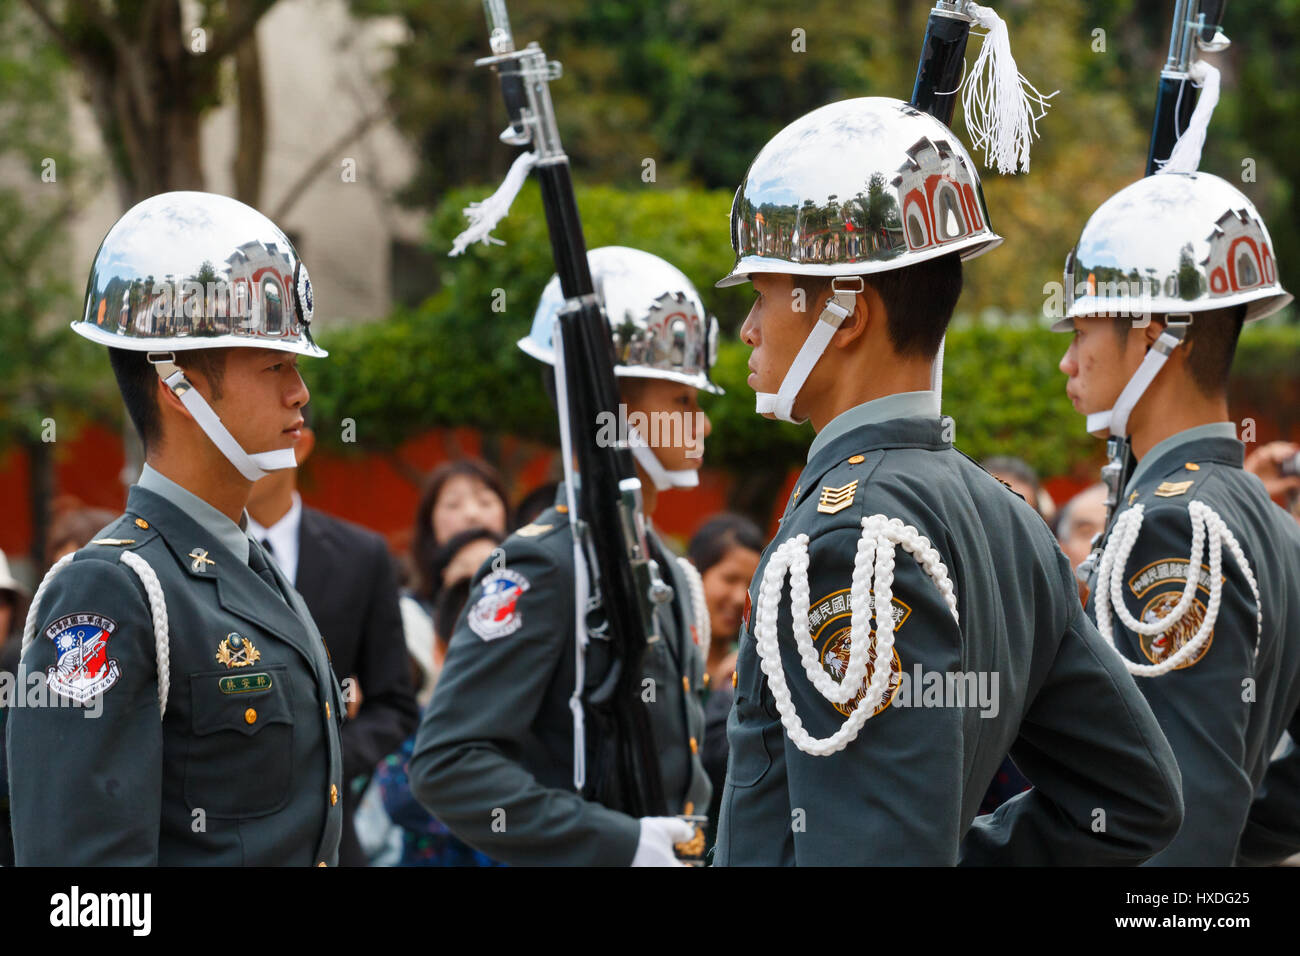 [Editorial Use Only] TAIPEI, TAIWAN: Changing of the Honor Guards with rifle and bayonet with tourist in the background Stock Photo